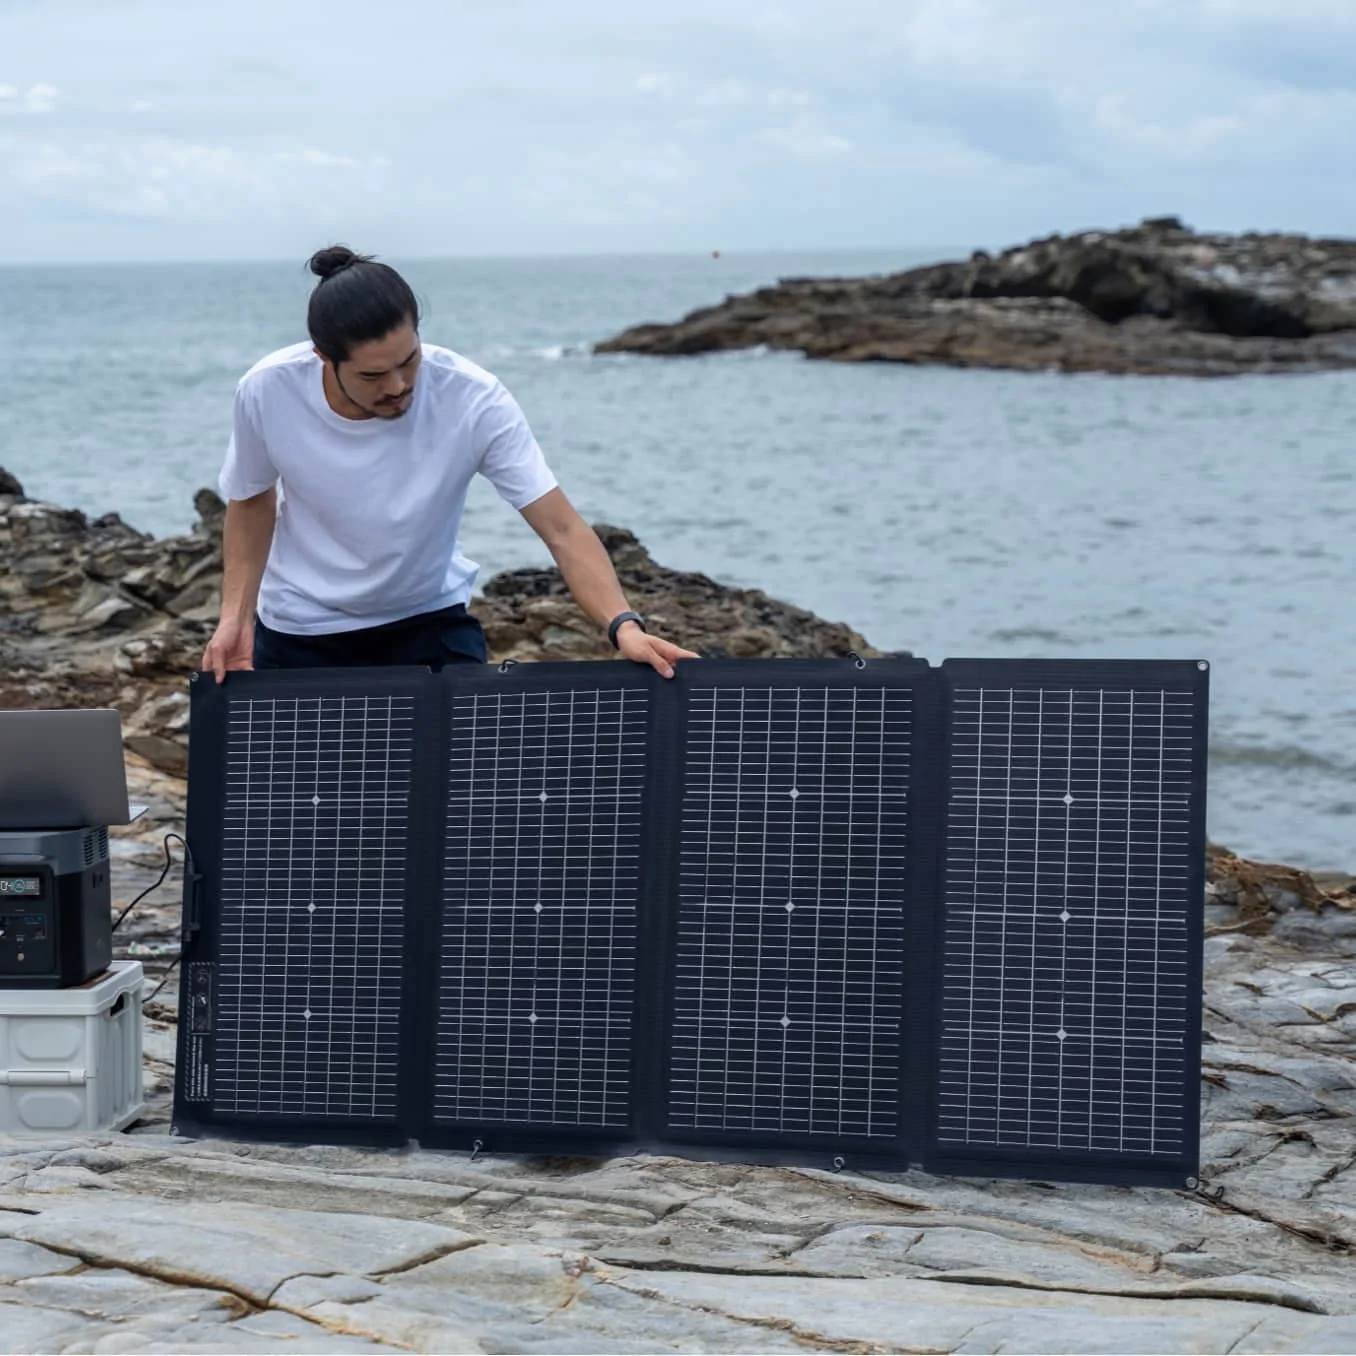 A man on the beach with an EcoFlow 220W Front and 155W Rear Bifacial Portable Solar Panel.